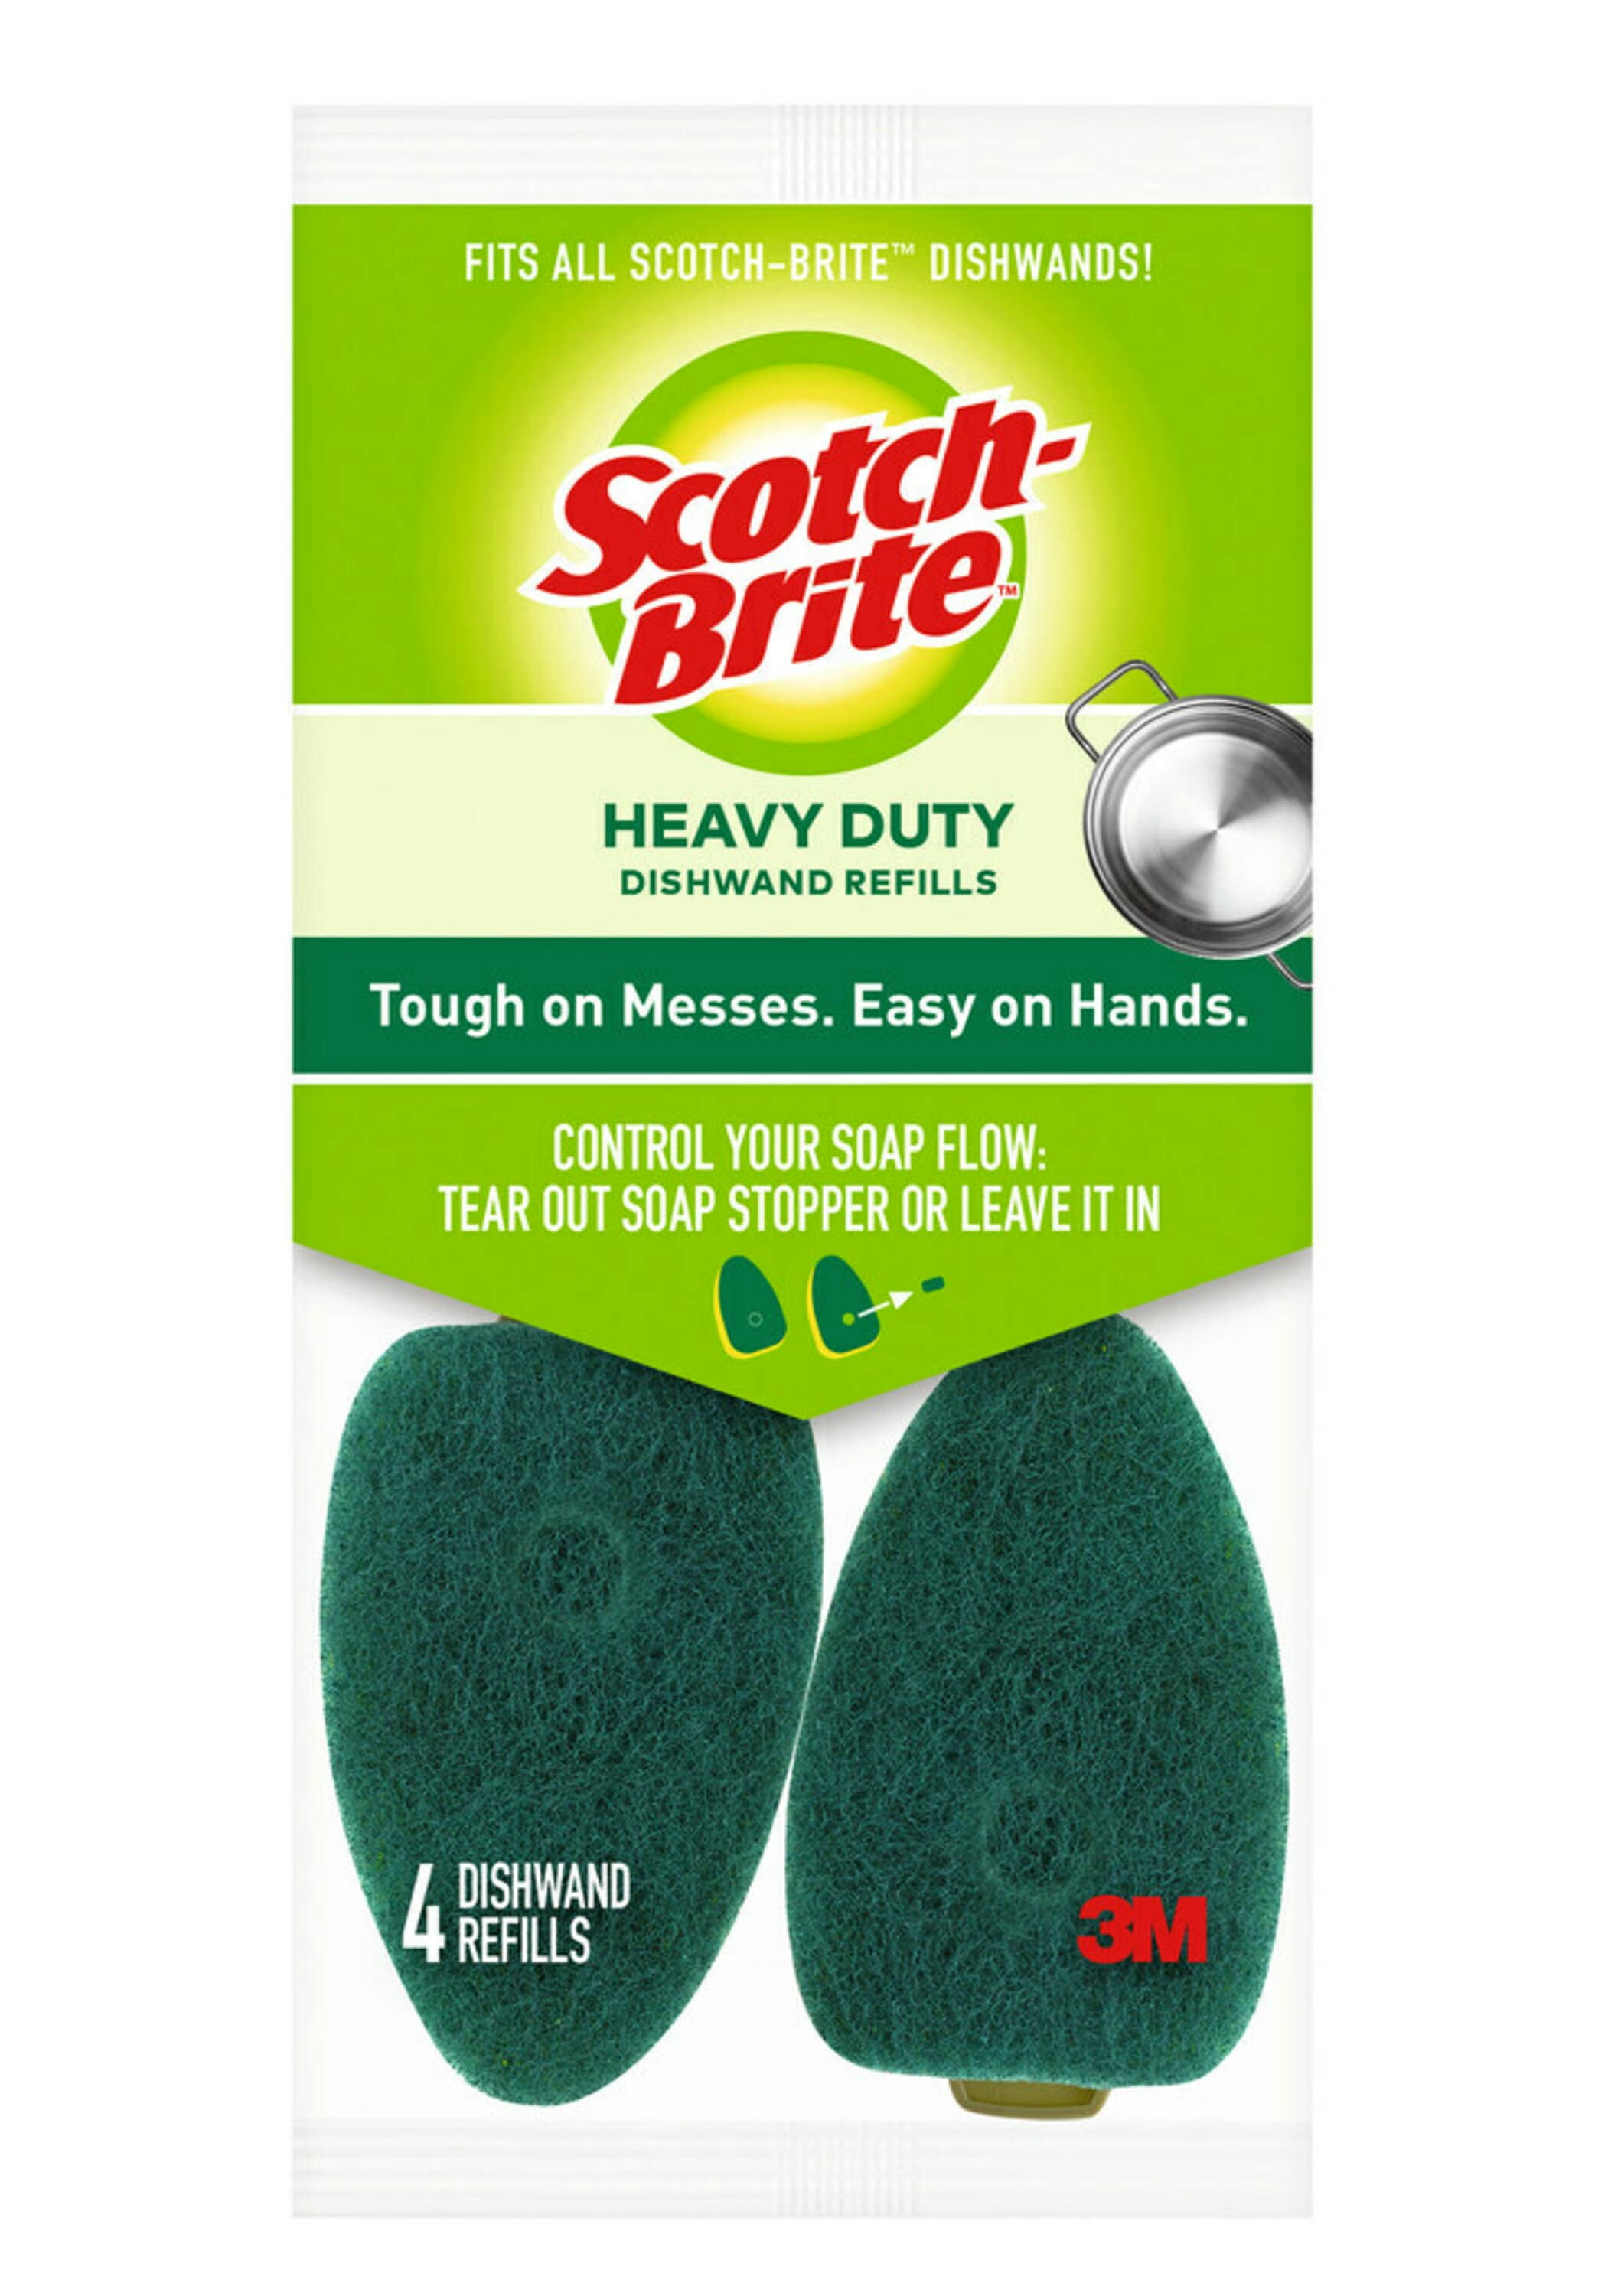  Smilyeez Replacement for Scotch Brite Brush, 4-Pack